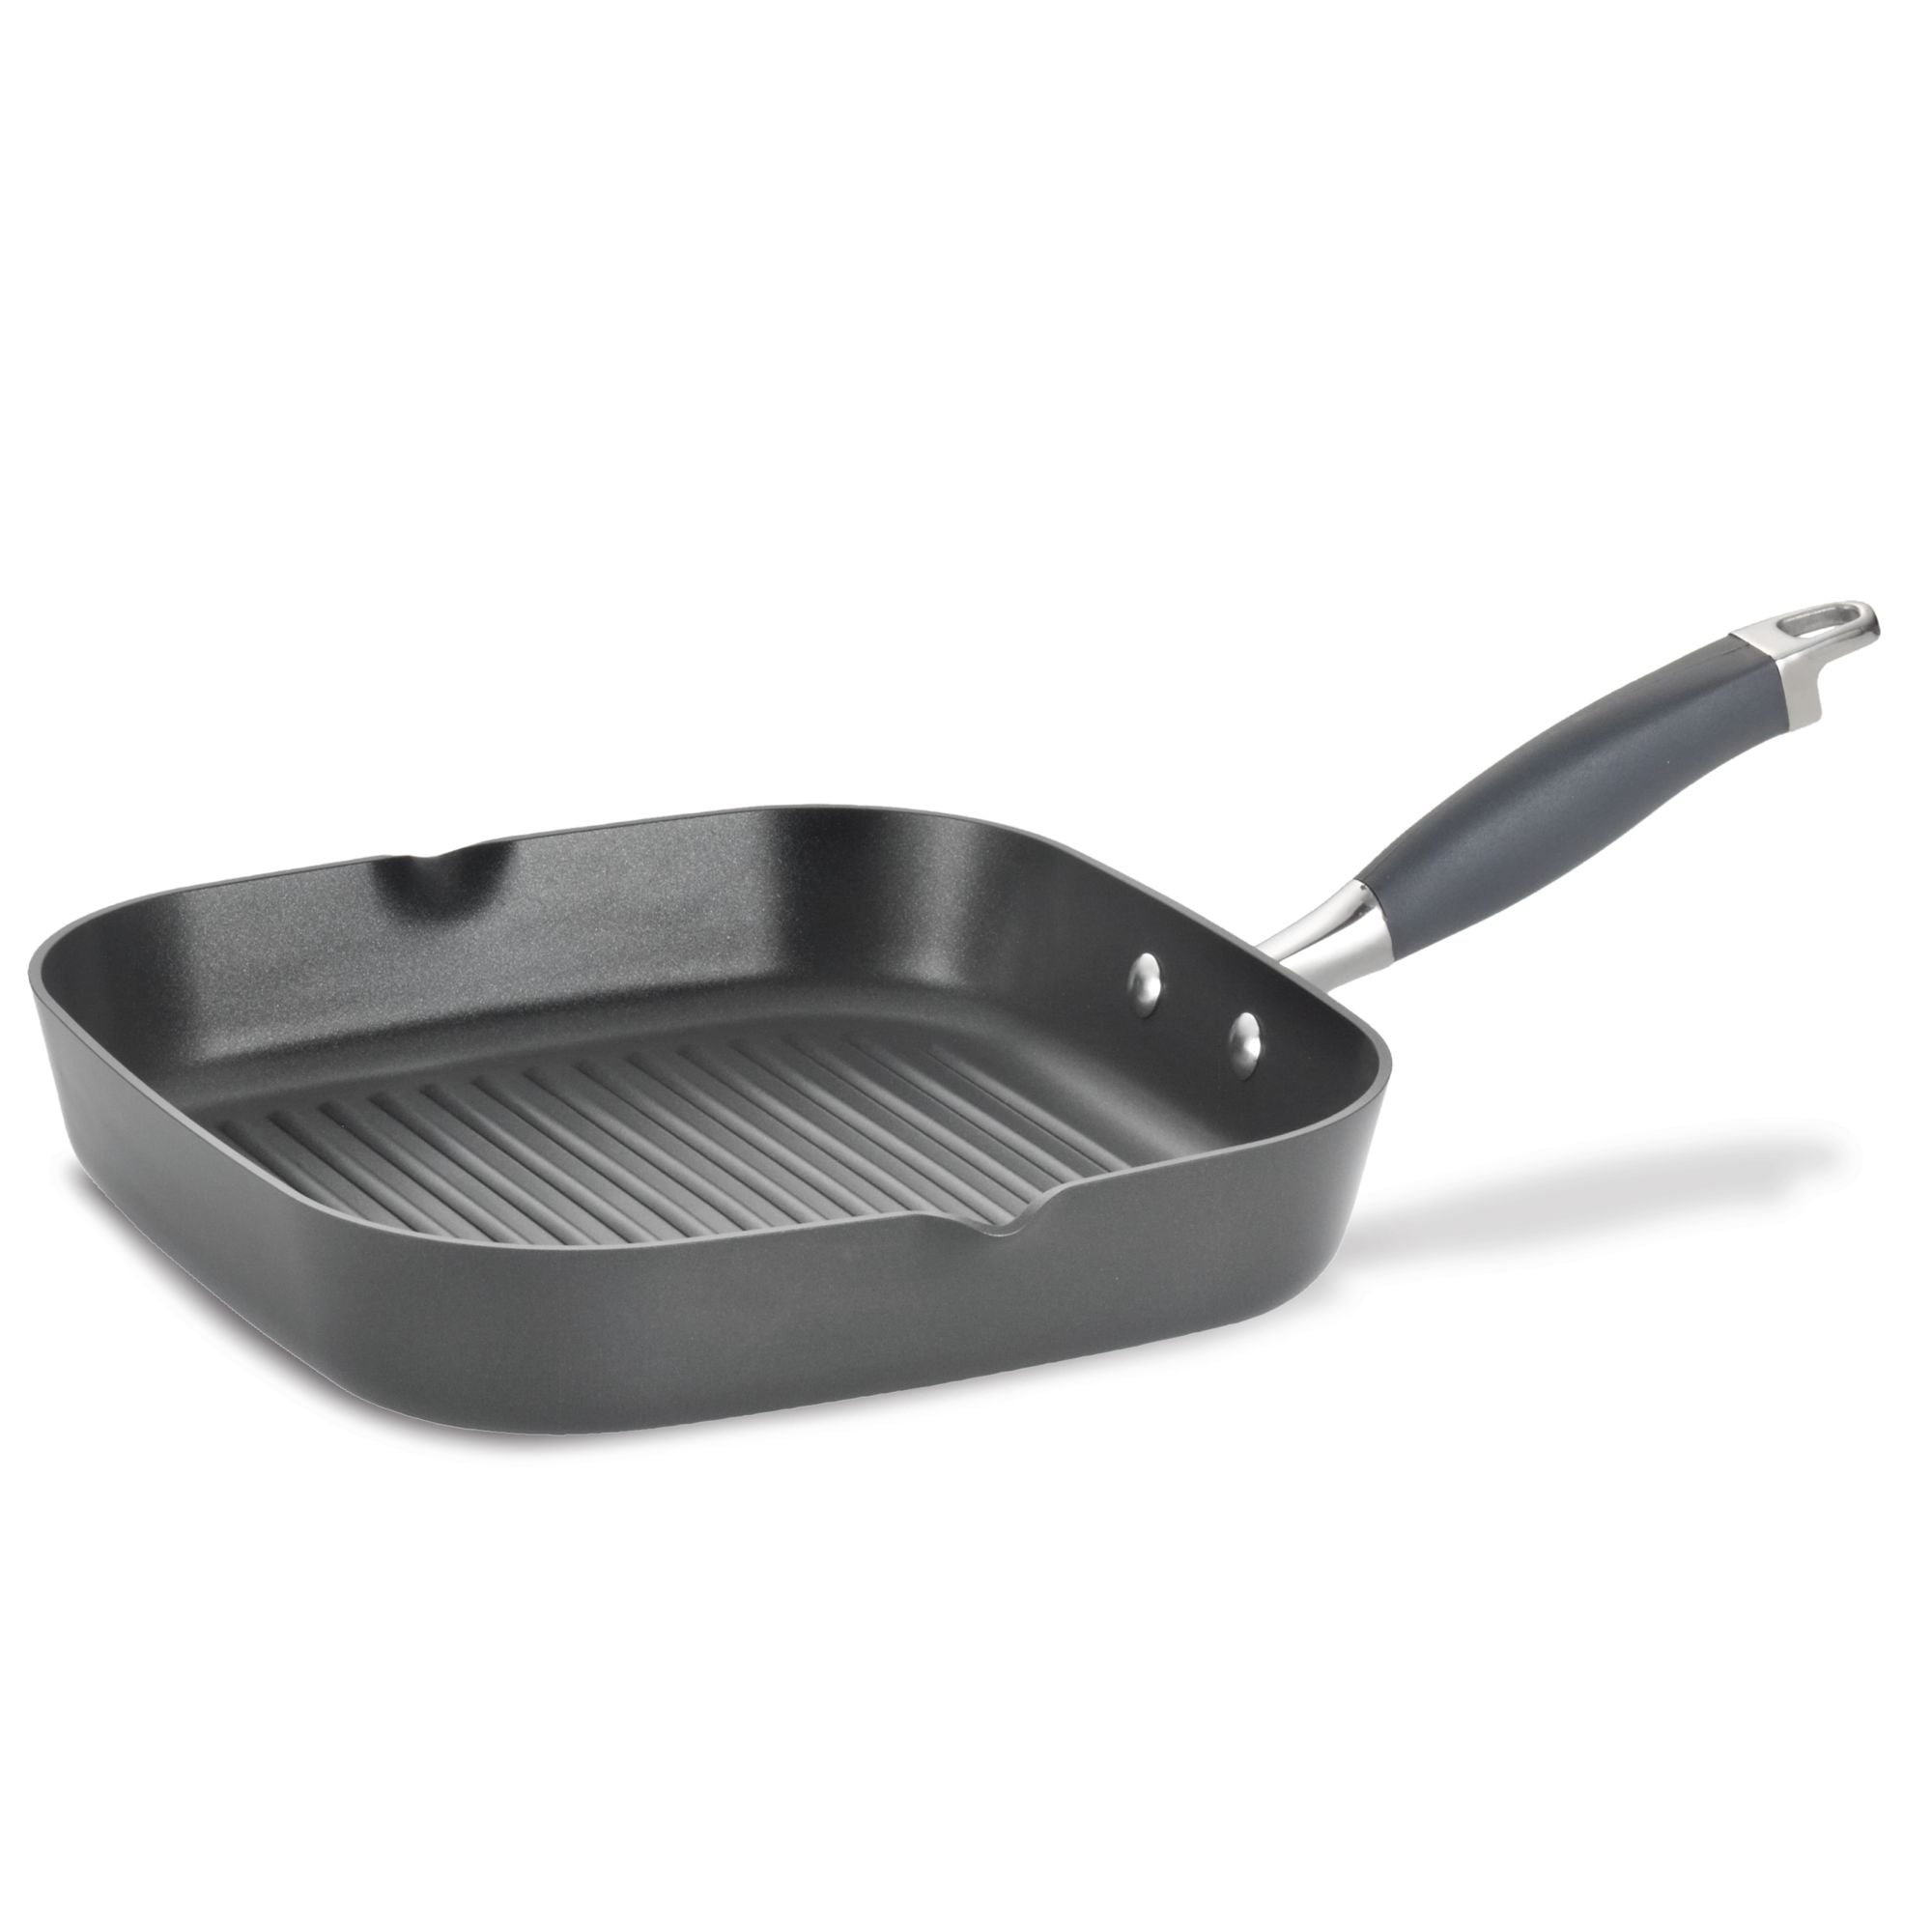 Anolon Advanced Hard Anodized Nonstick Sauce Pan/Saucepan with Straining  and Lid, 2 Quart, Graphite